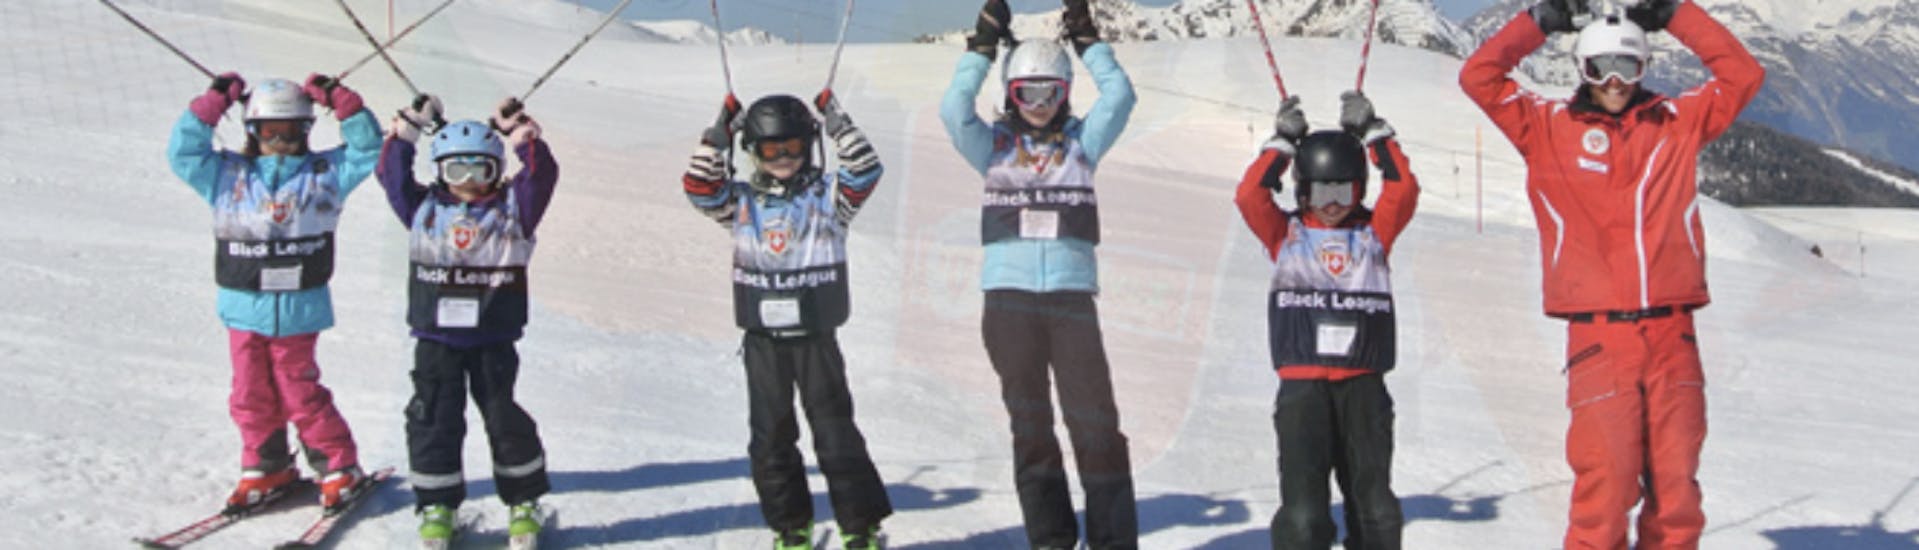 Skiing Lessons for Kids (5-12 years) Tracouet.